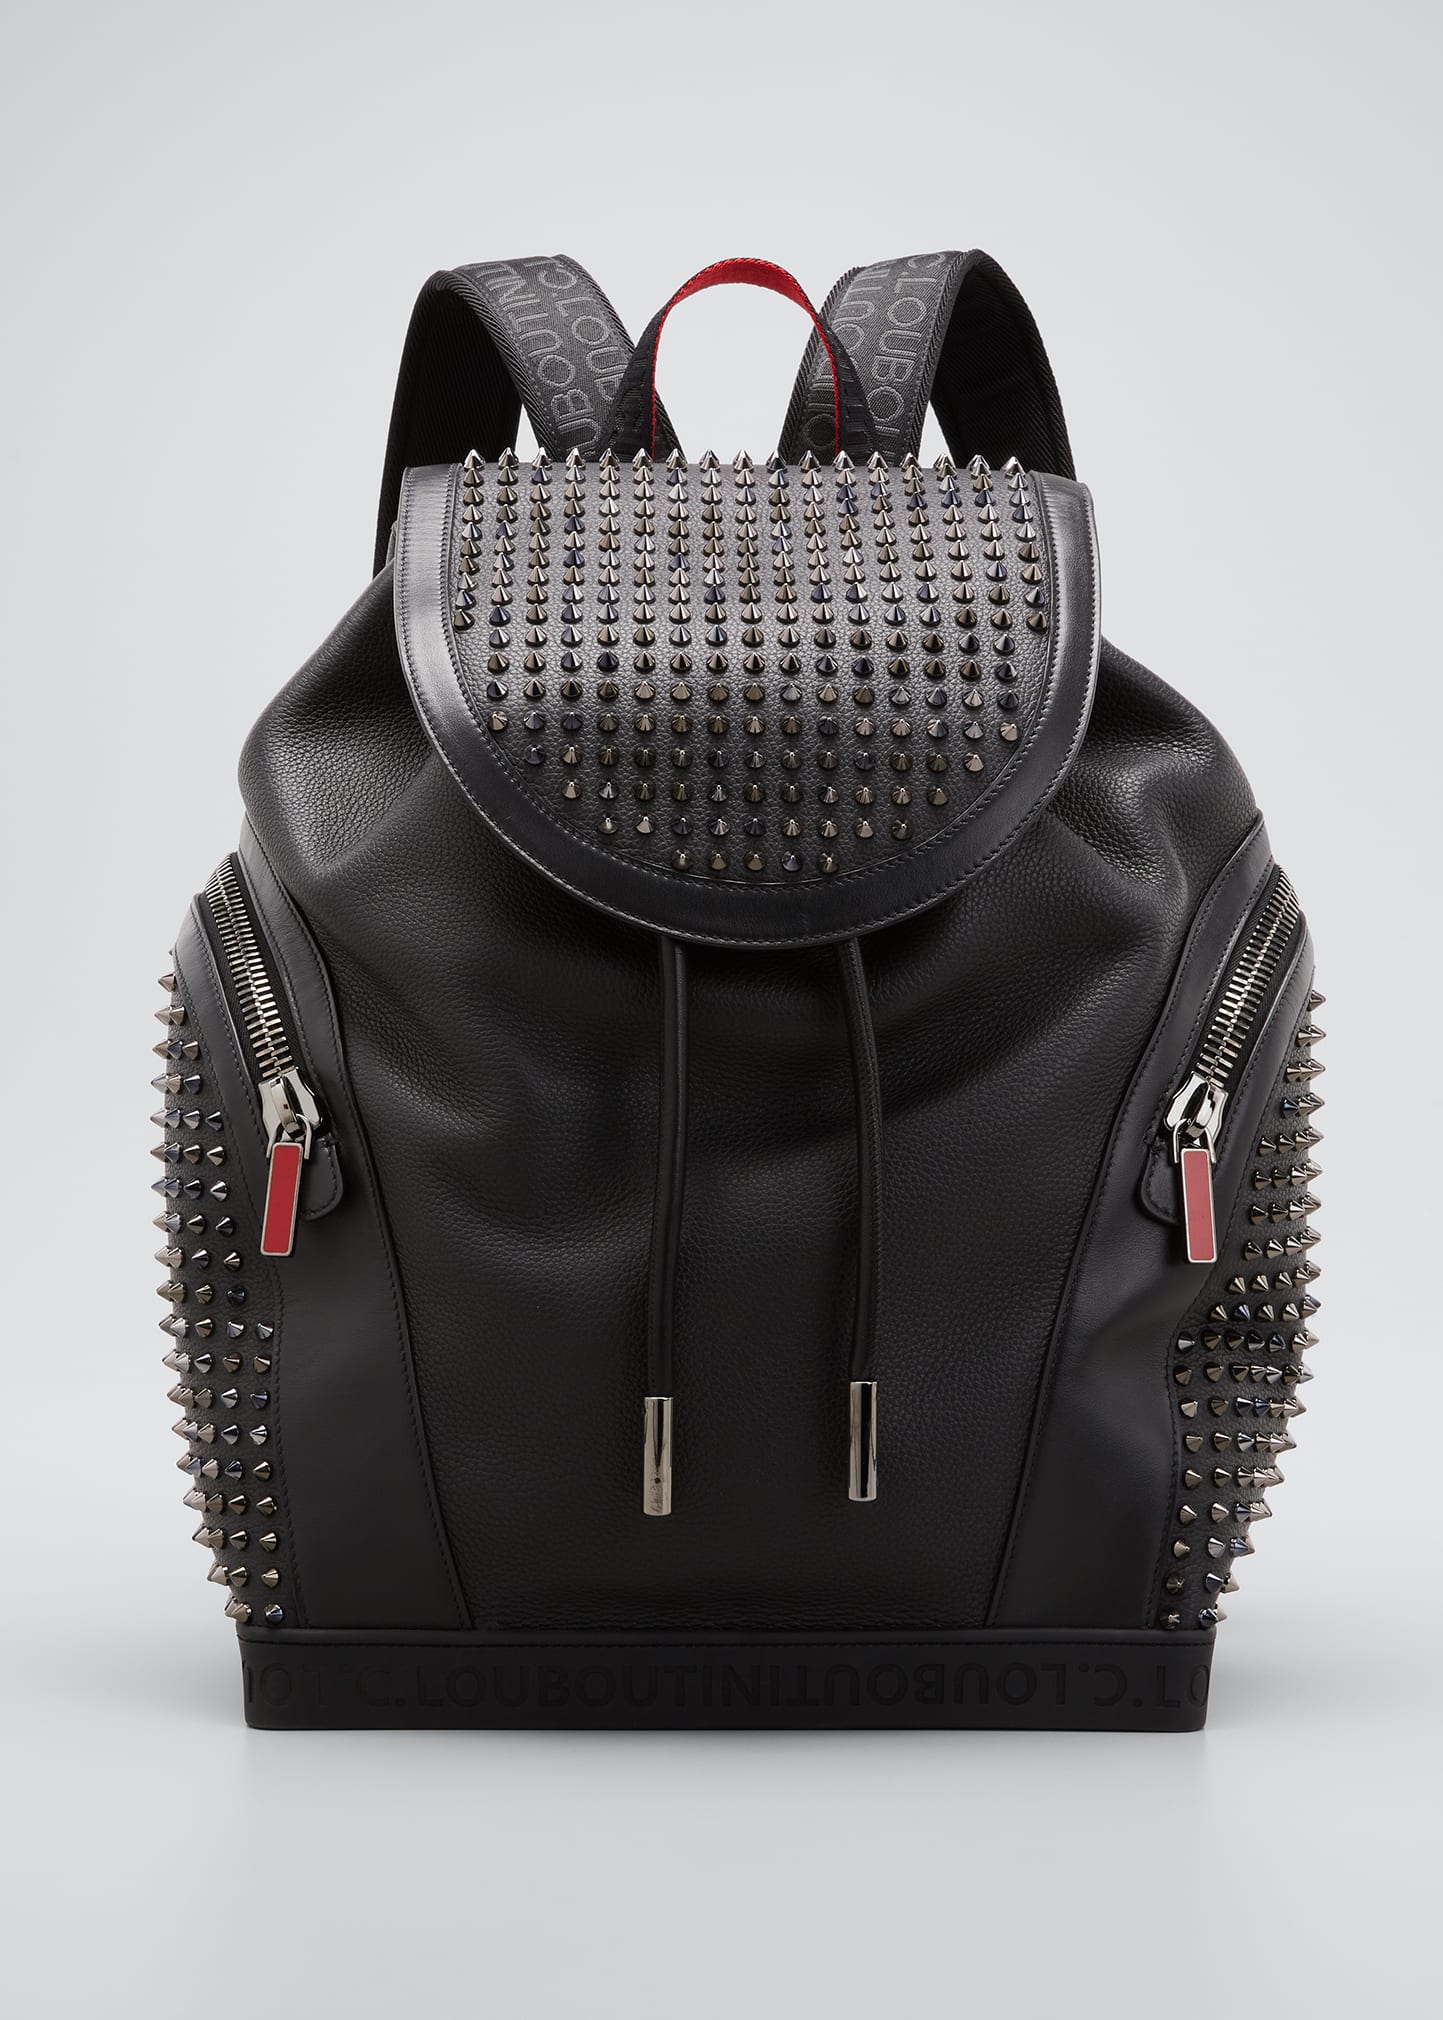 Christian Louboutin Men's Explorafunk Small Calf Empire Spikes Backpack In Black/red